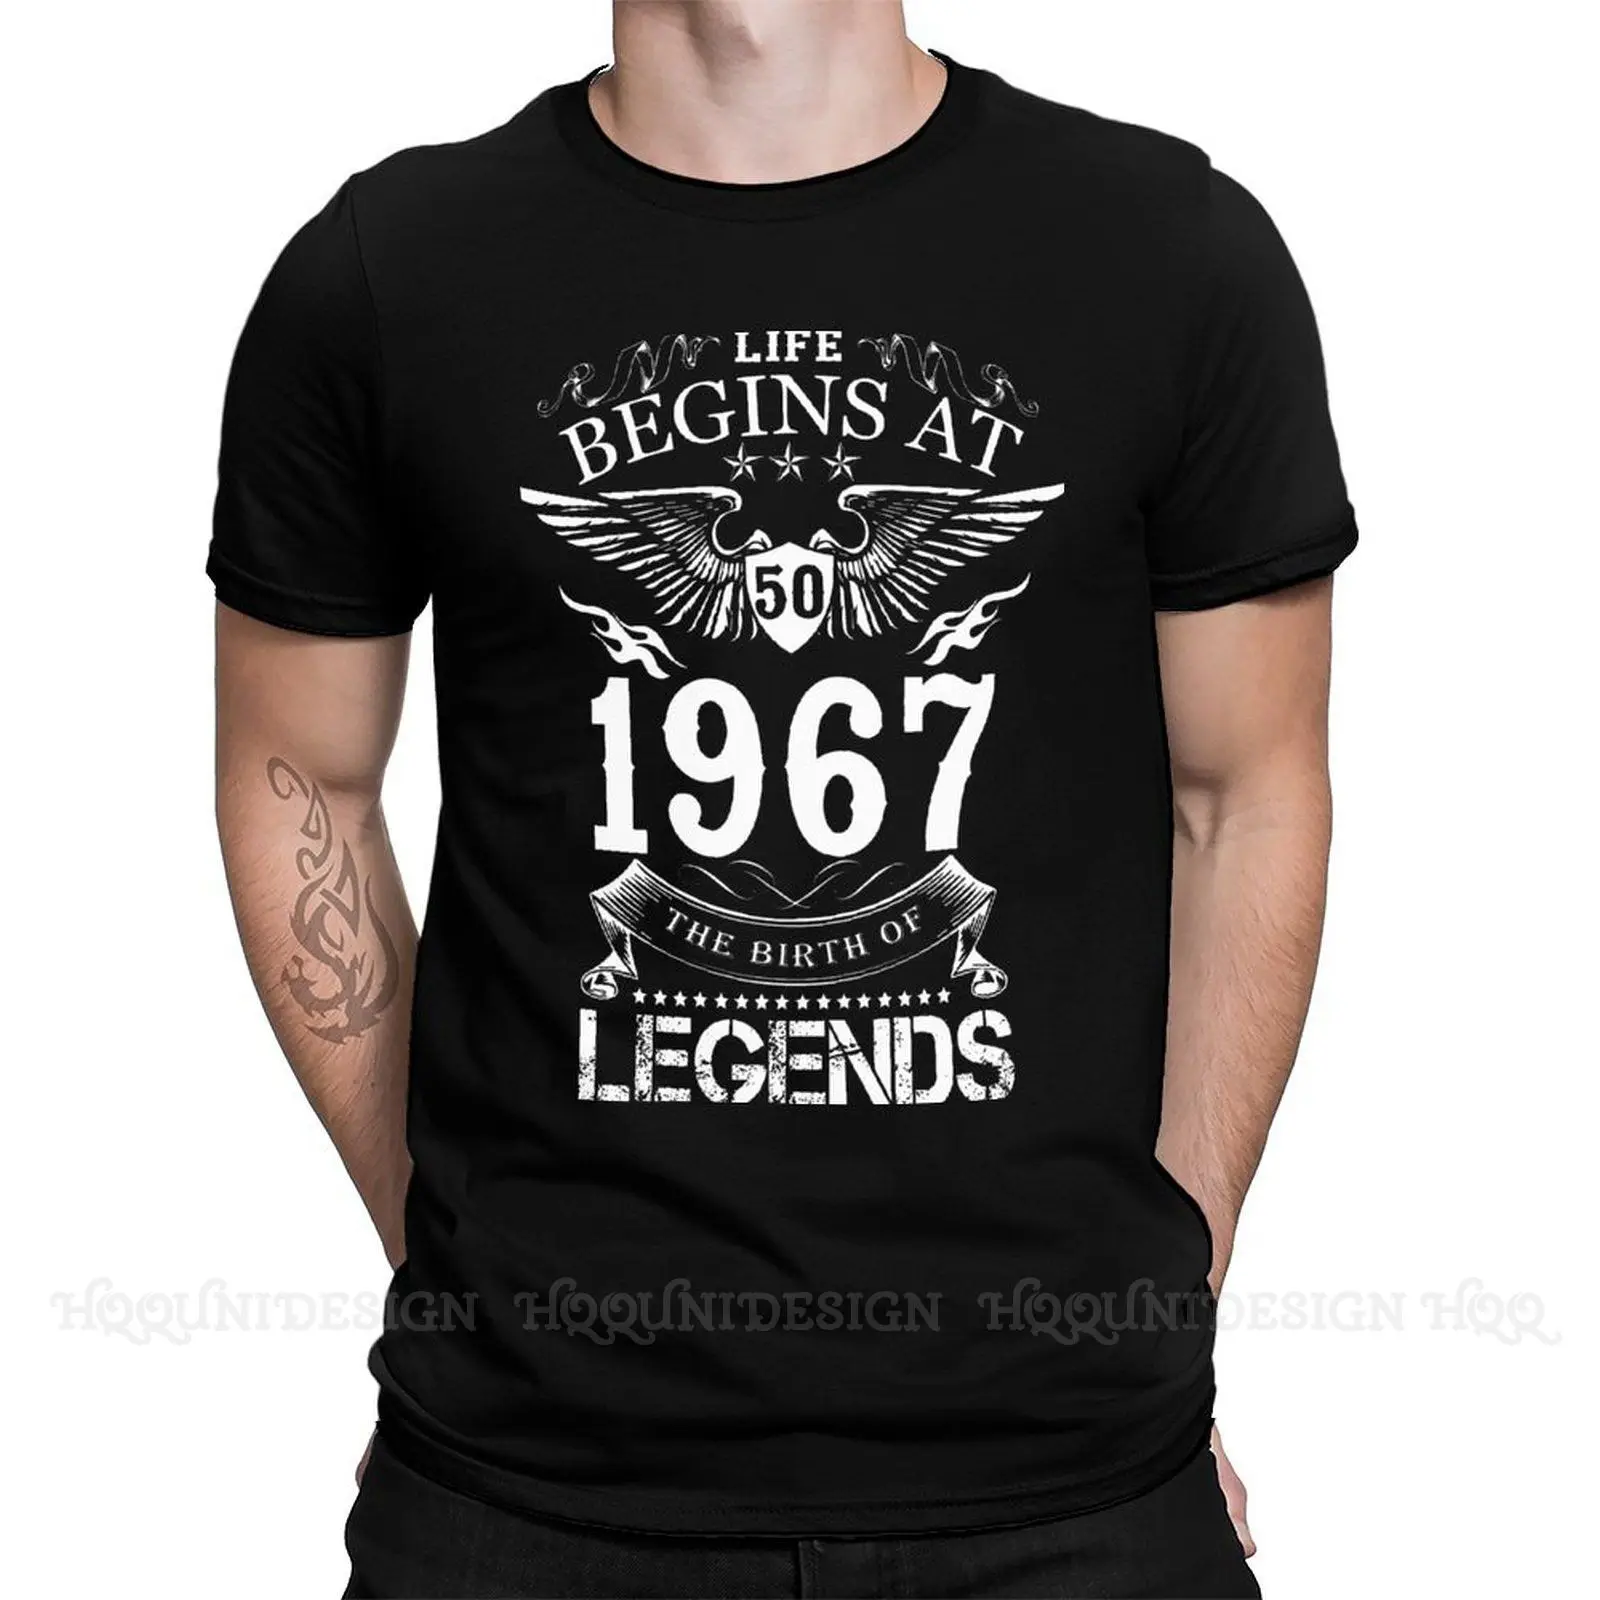 

Life Begins At 50 1967 The Birth Of Legends Print Cotton T-Shirt Camiseta Hombre Born in 1971 Men Fashion Streetwear Shirt Adult